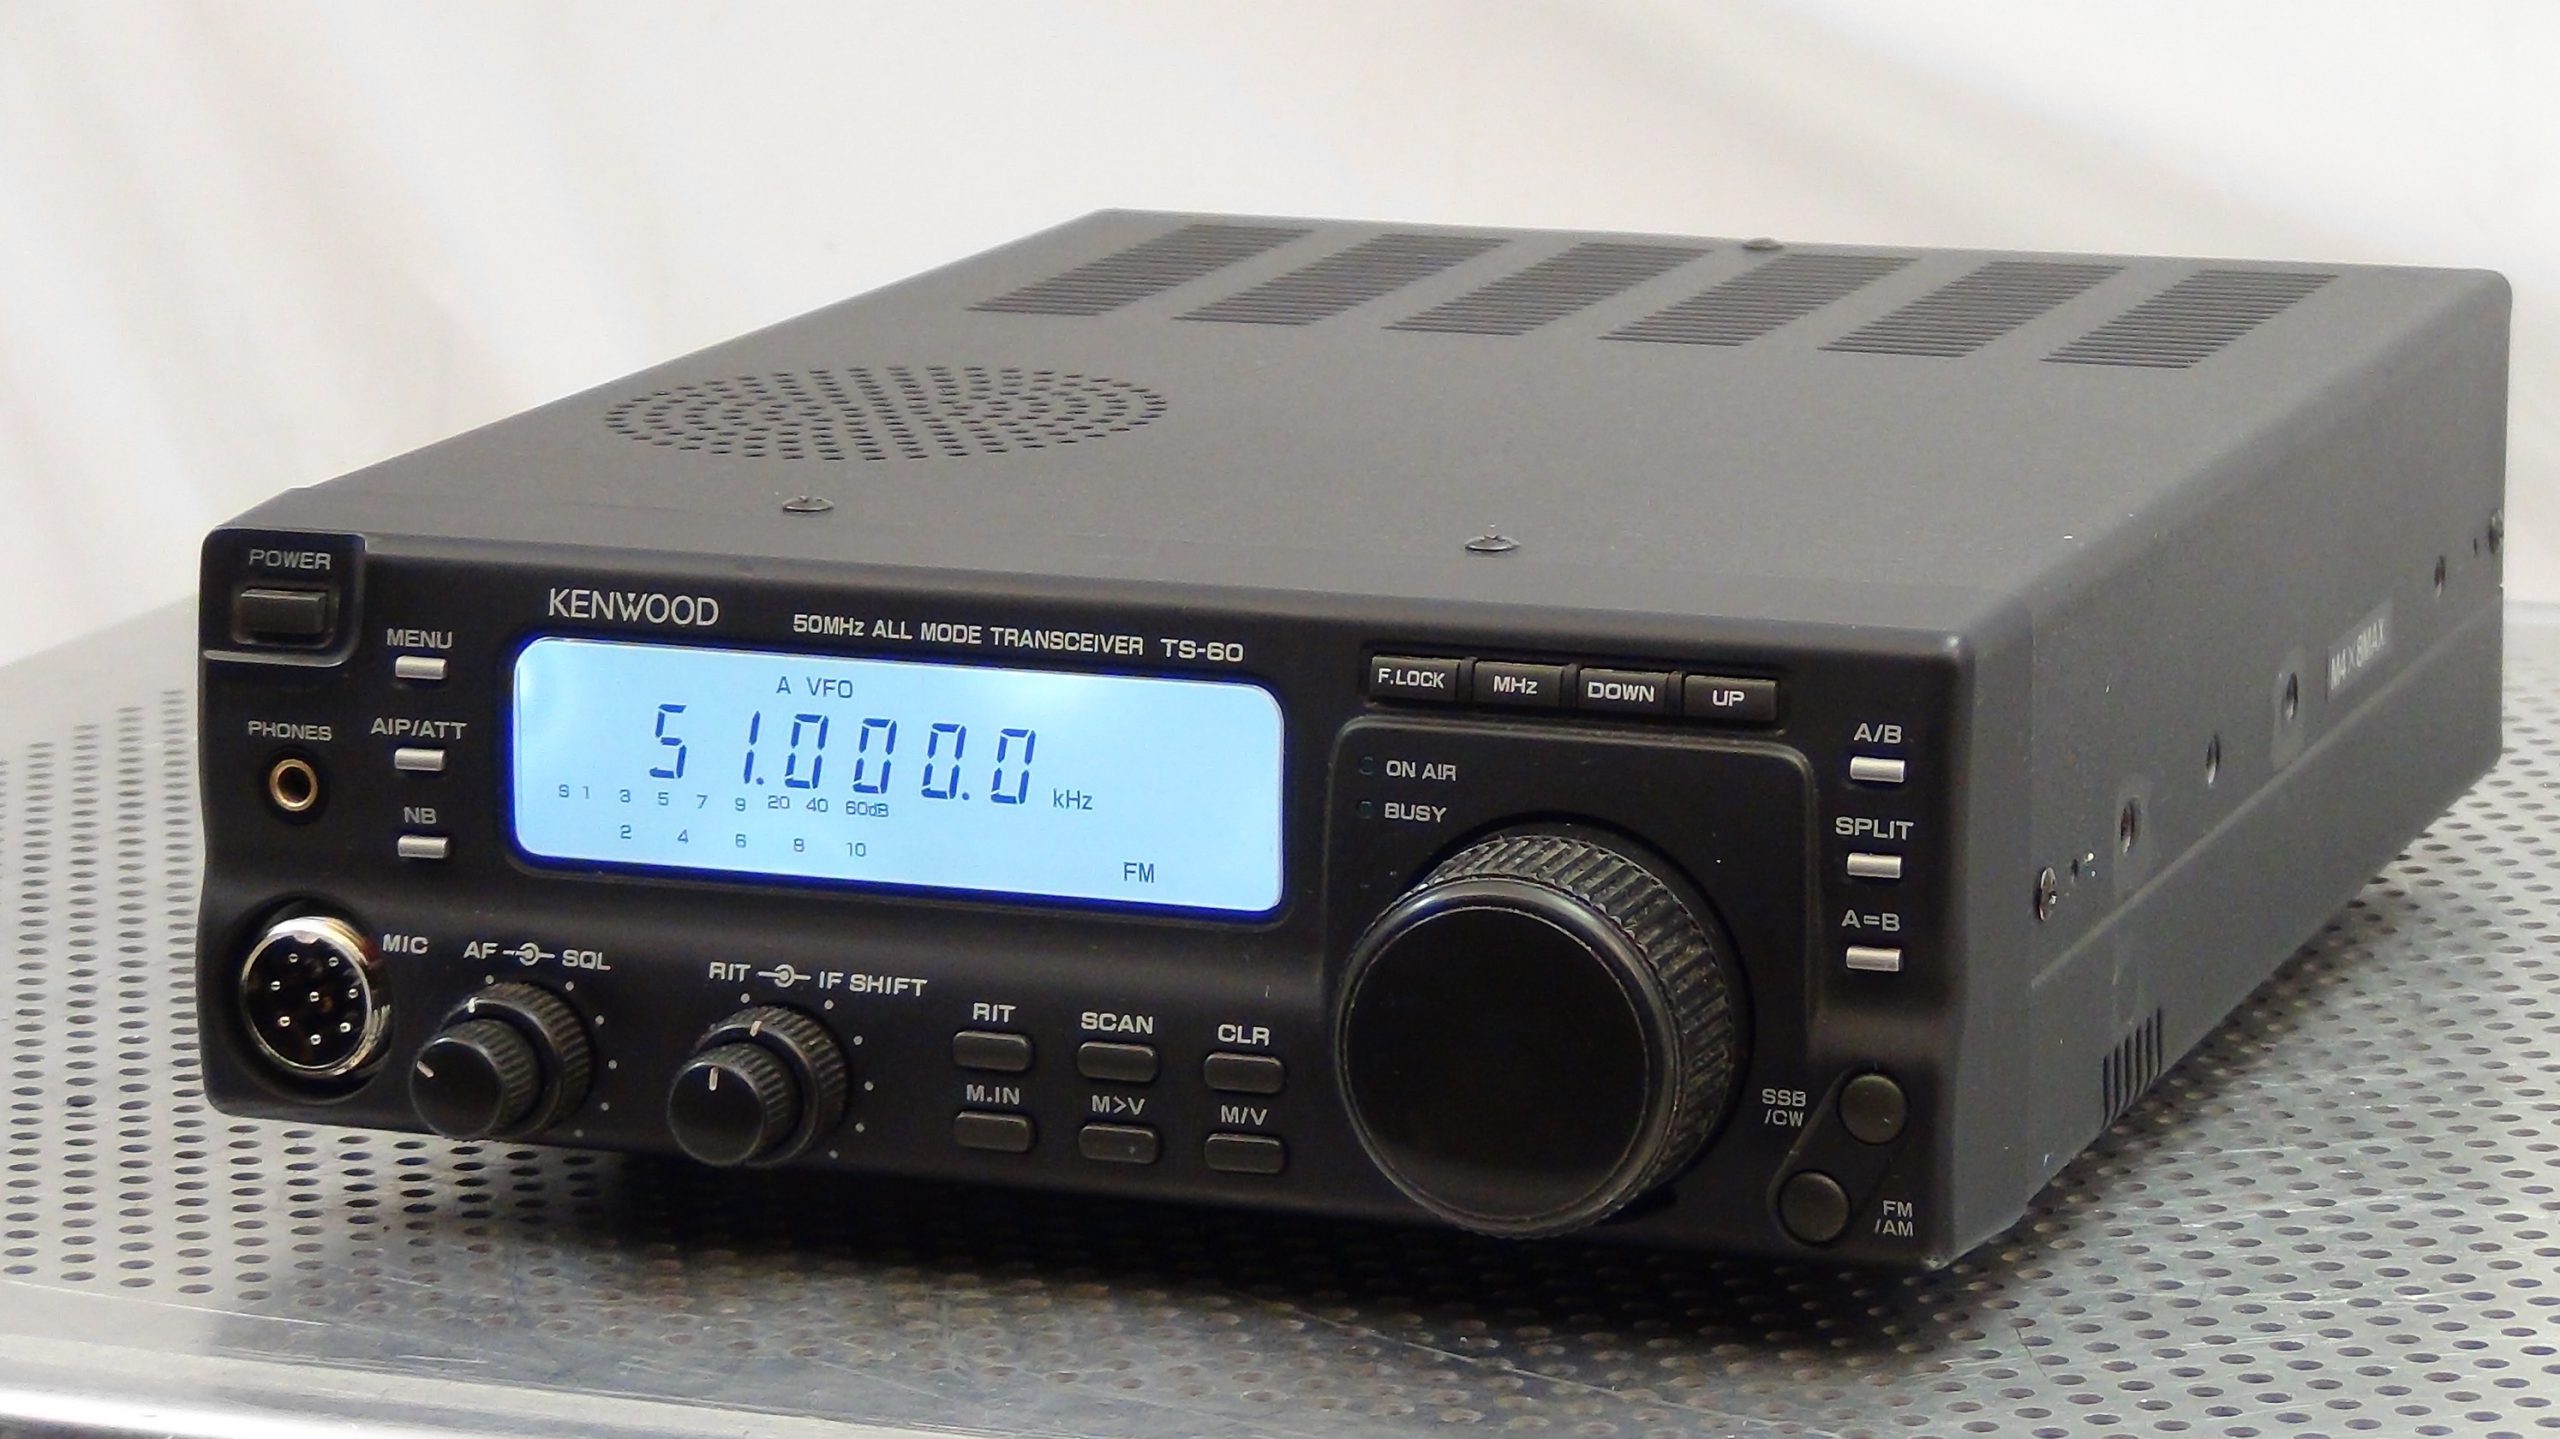 Kenwood TS-60 Transceiver – FREE Shipping in Contiguous USA!